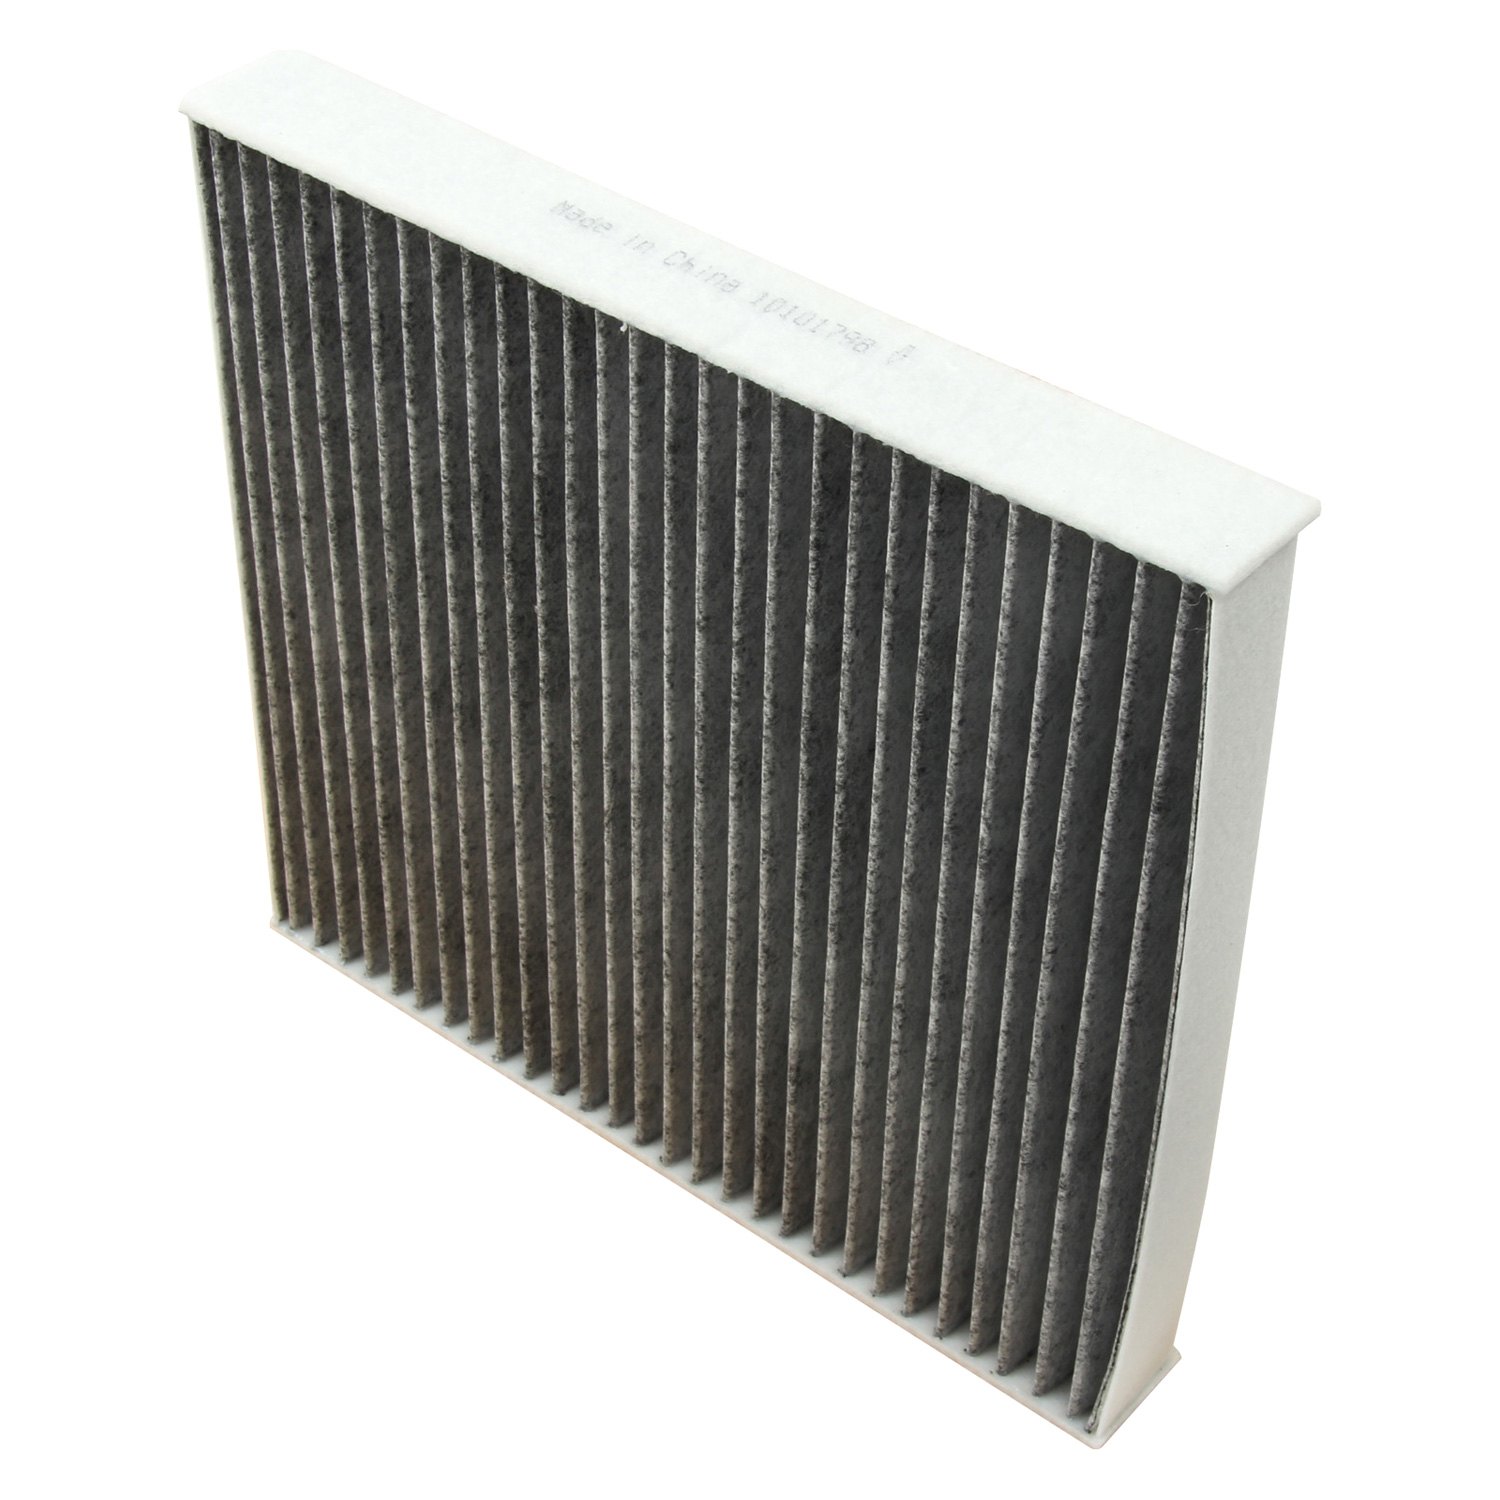 One New OPparts Cabin Air Filter 81954021 5Q0819653 for Audi for Volkswagen VW